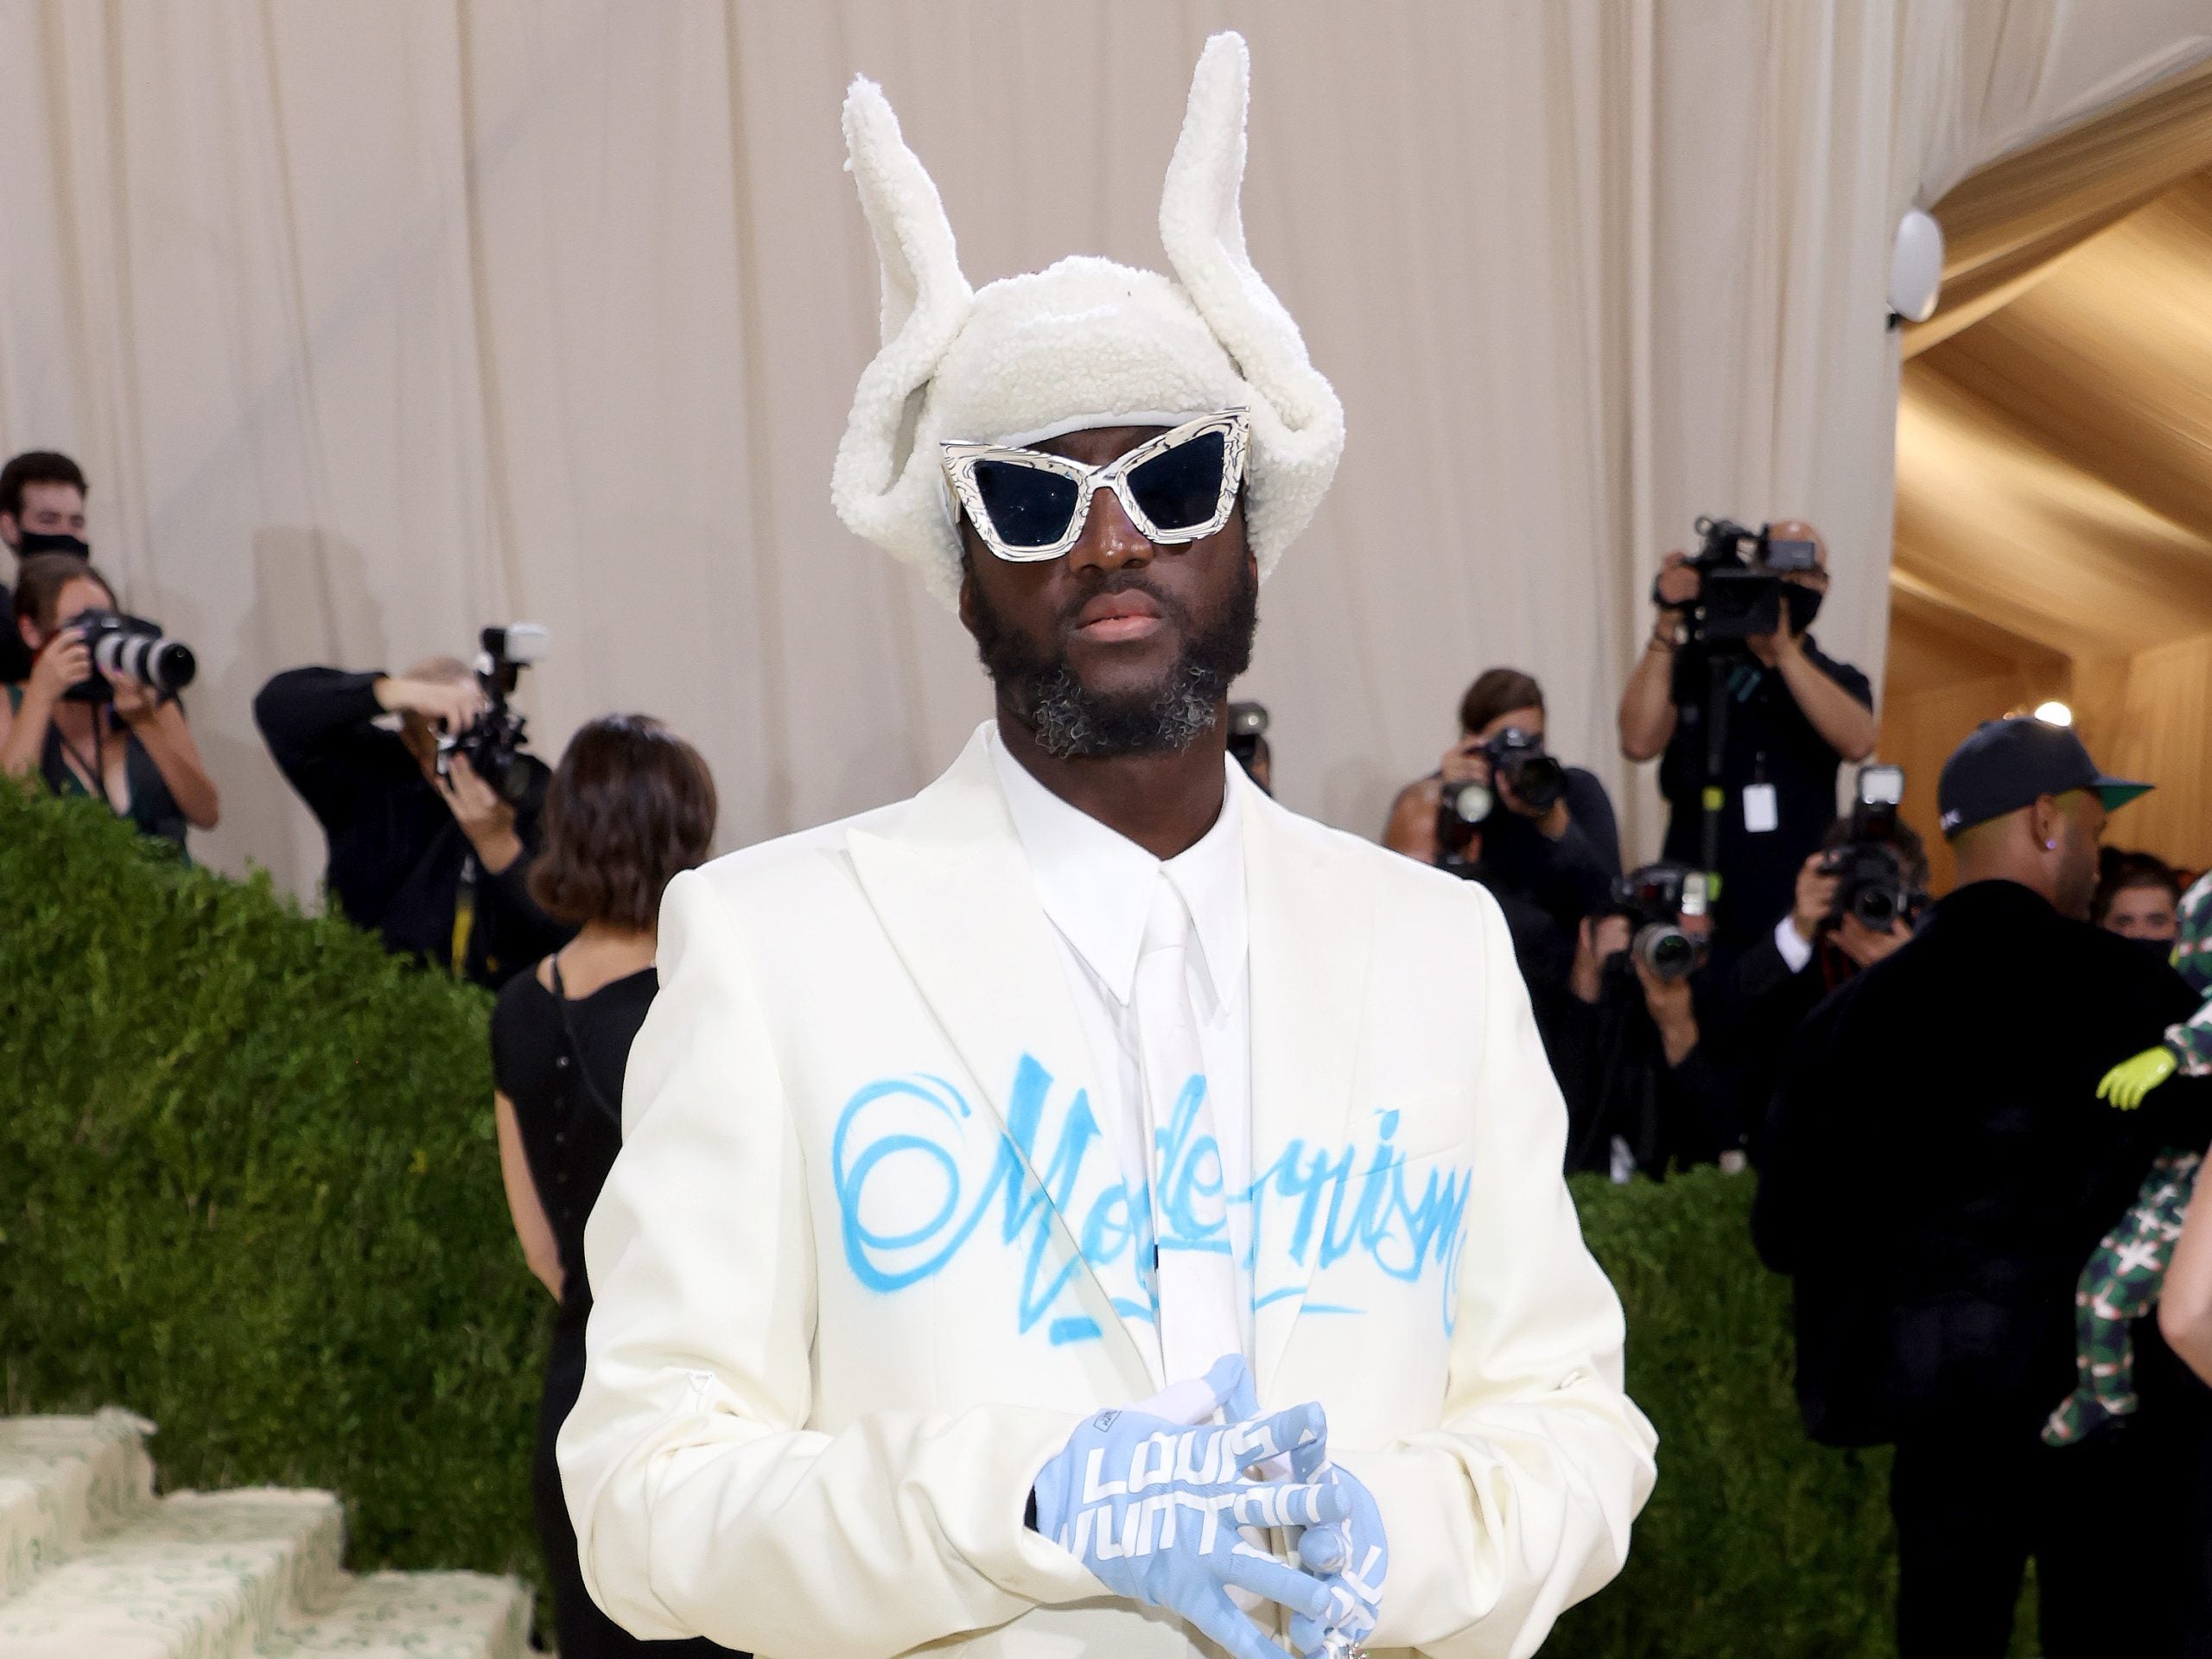 These are Virgil Abloh's most iconic fashion moments